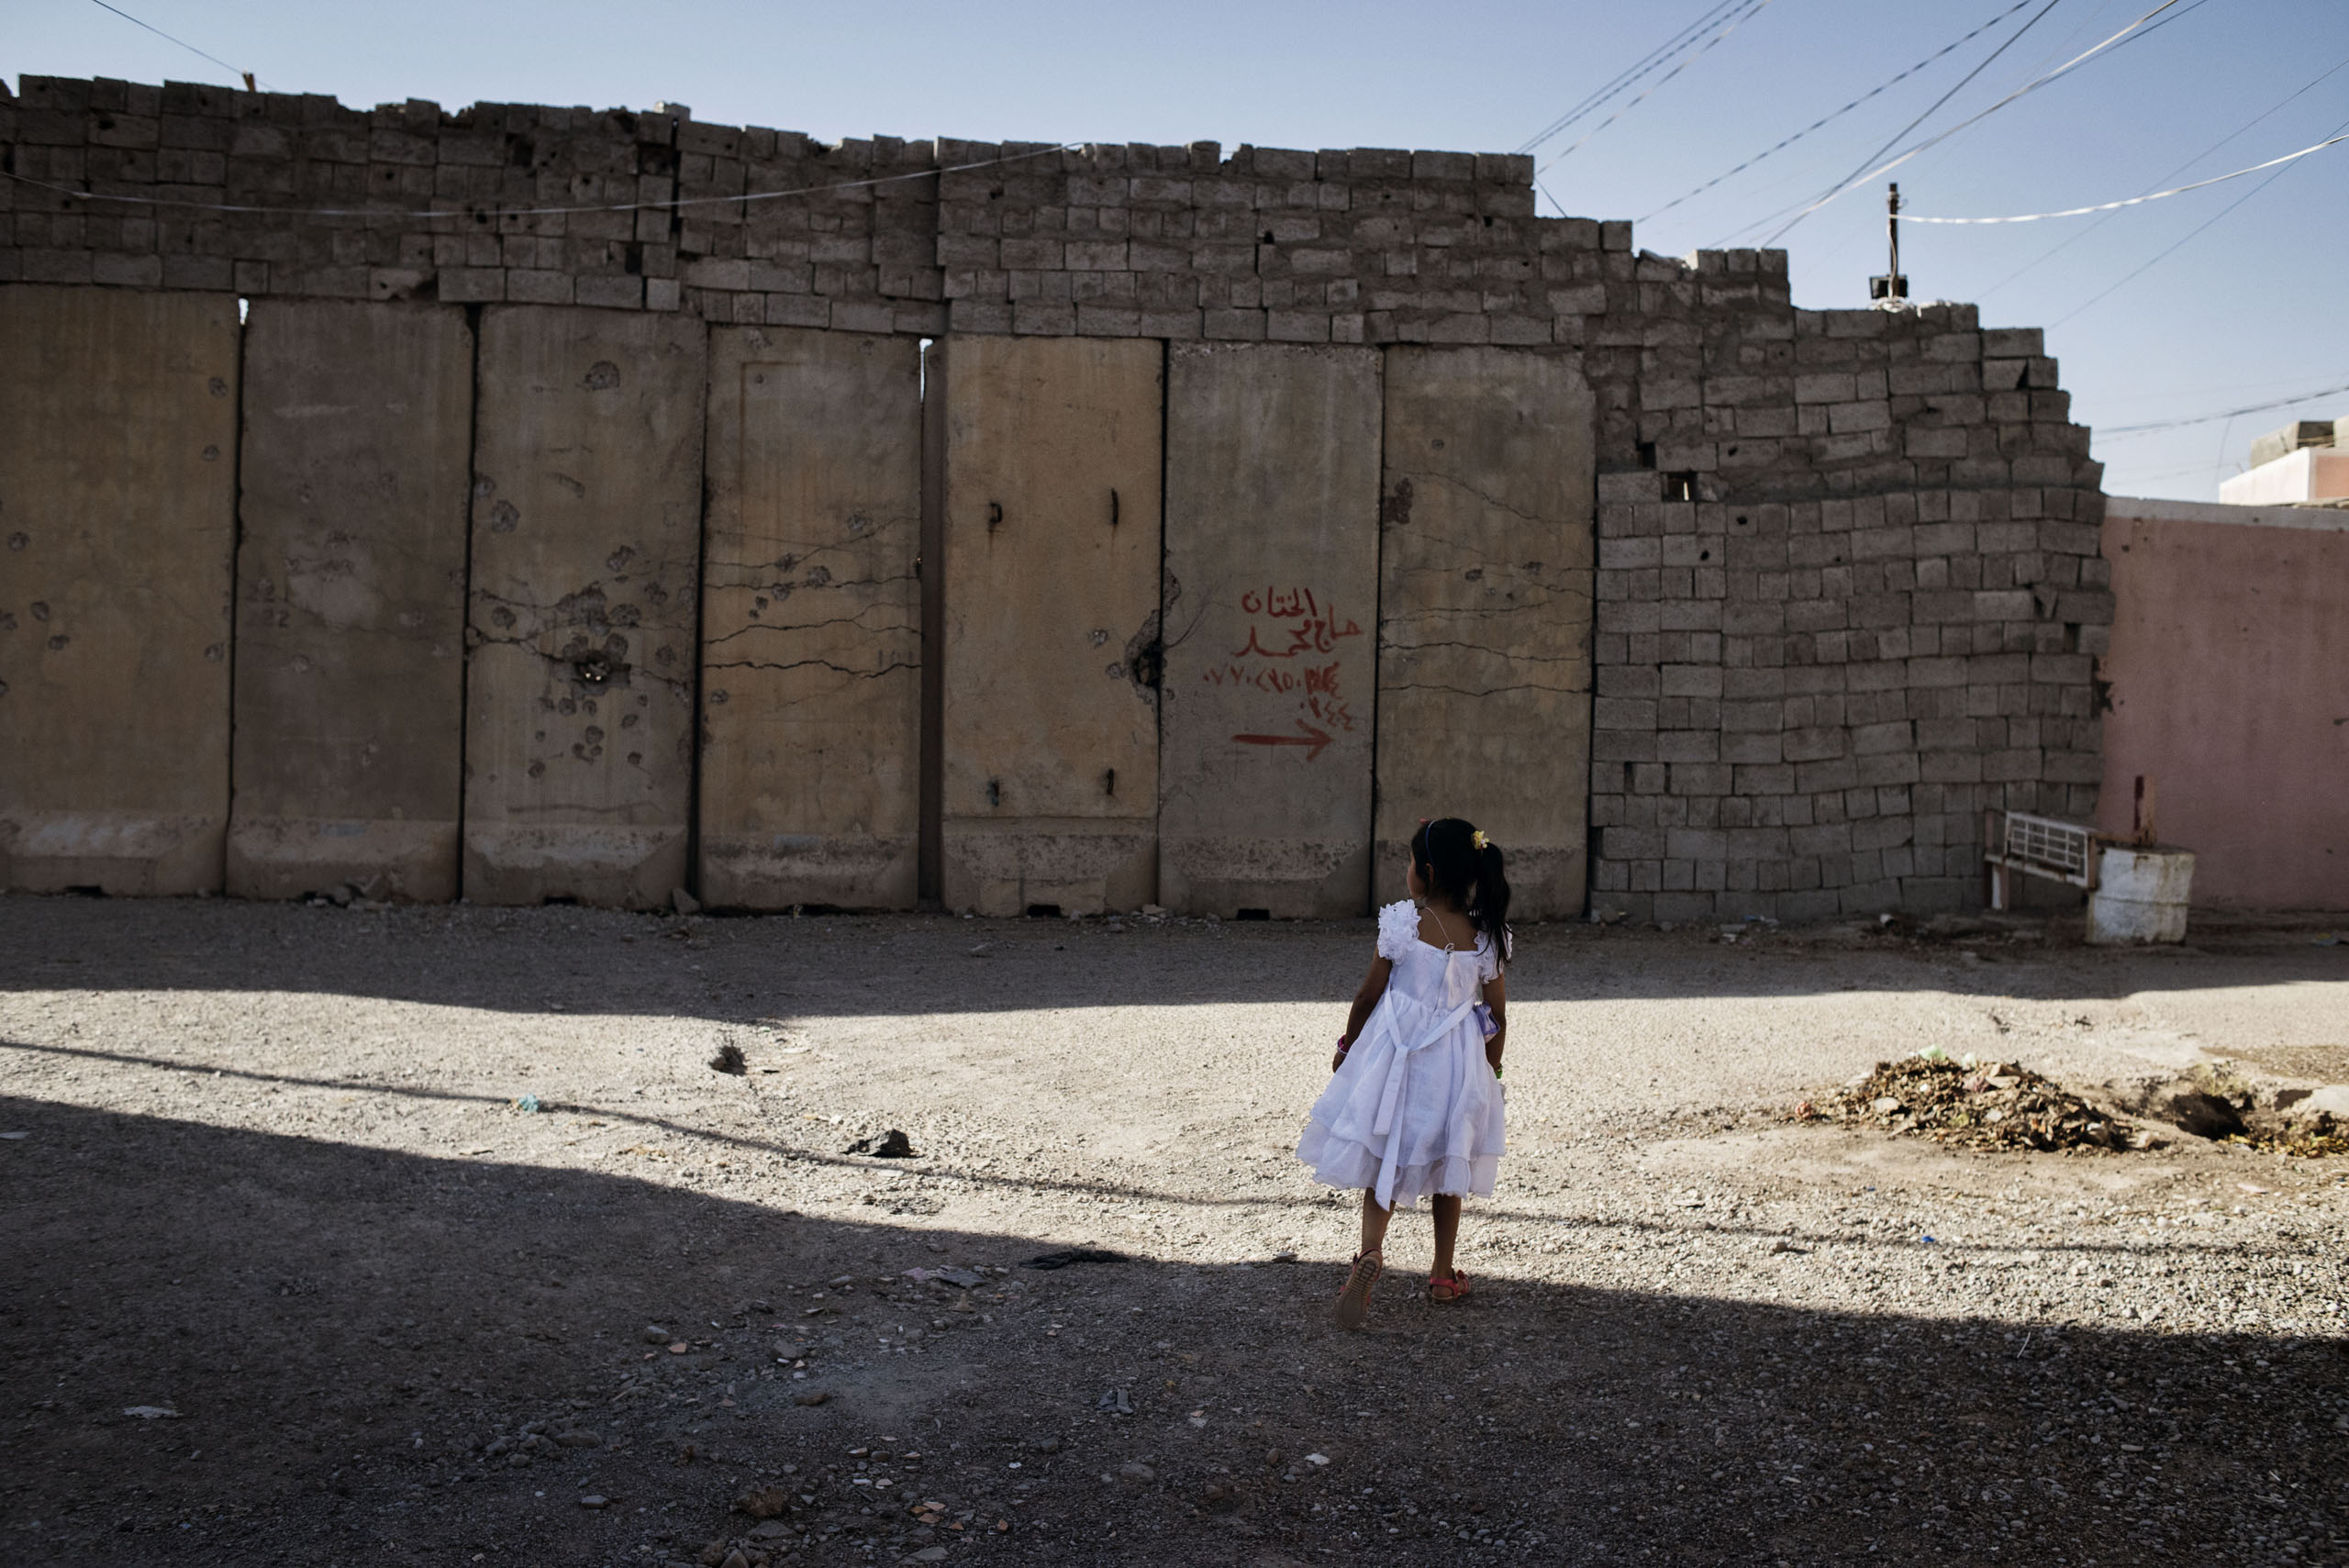 A young girl walks by a wall in the town of Tuz Khurmatu, northern Iraq, May 20, 2016. Walls have been installed in the city as a result of recent fighting between rival Kurdish and Shiite Turkmen factions. The deadly clashes signaled tension among among two groups nominally united in the broader fight against ISIS.